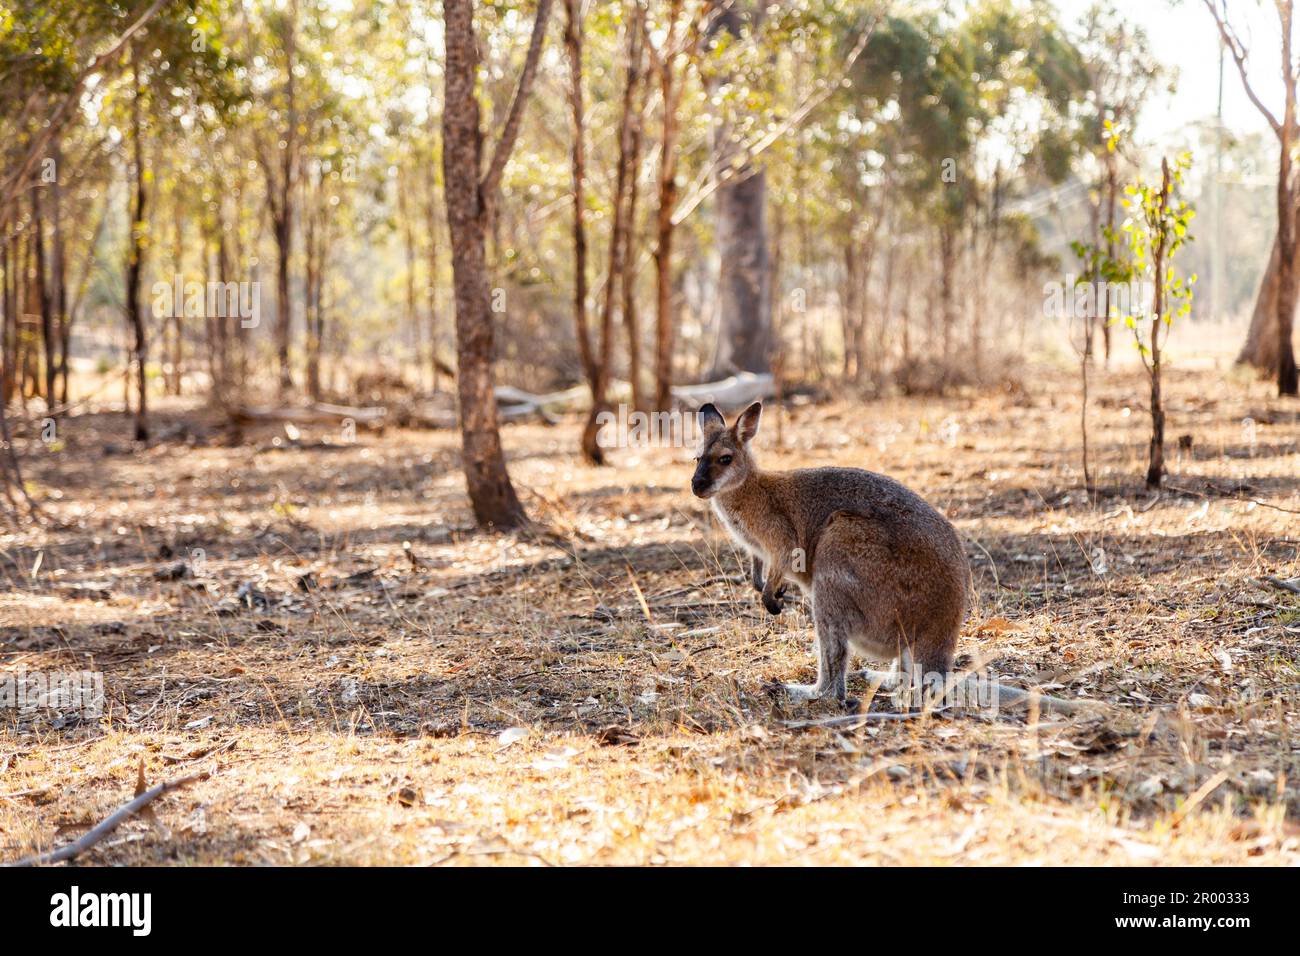 Dry australian paddock with wallaby resting in shade under eucalypt trees Stock Photo